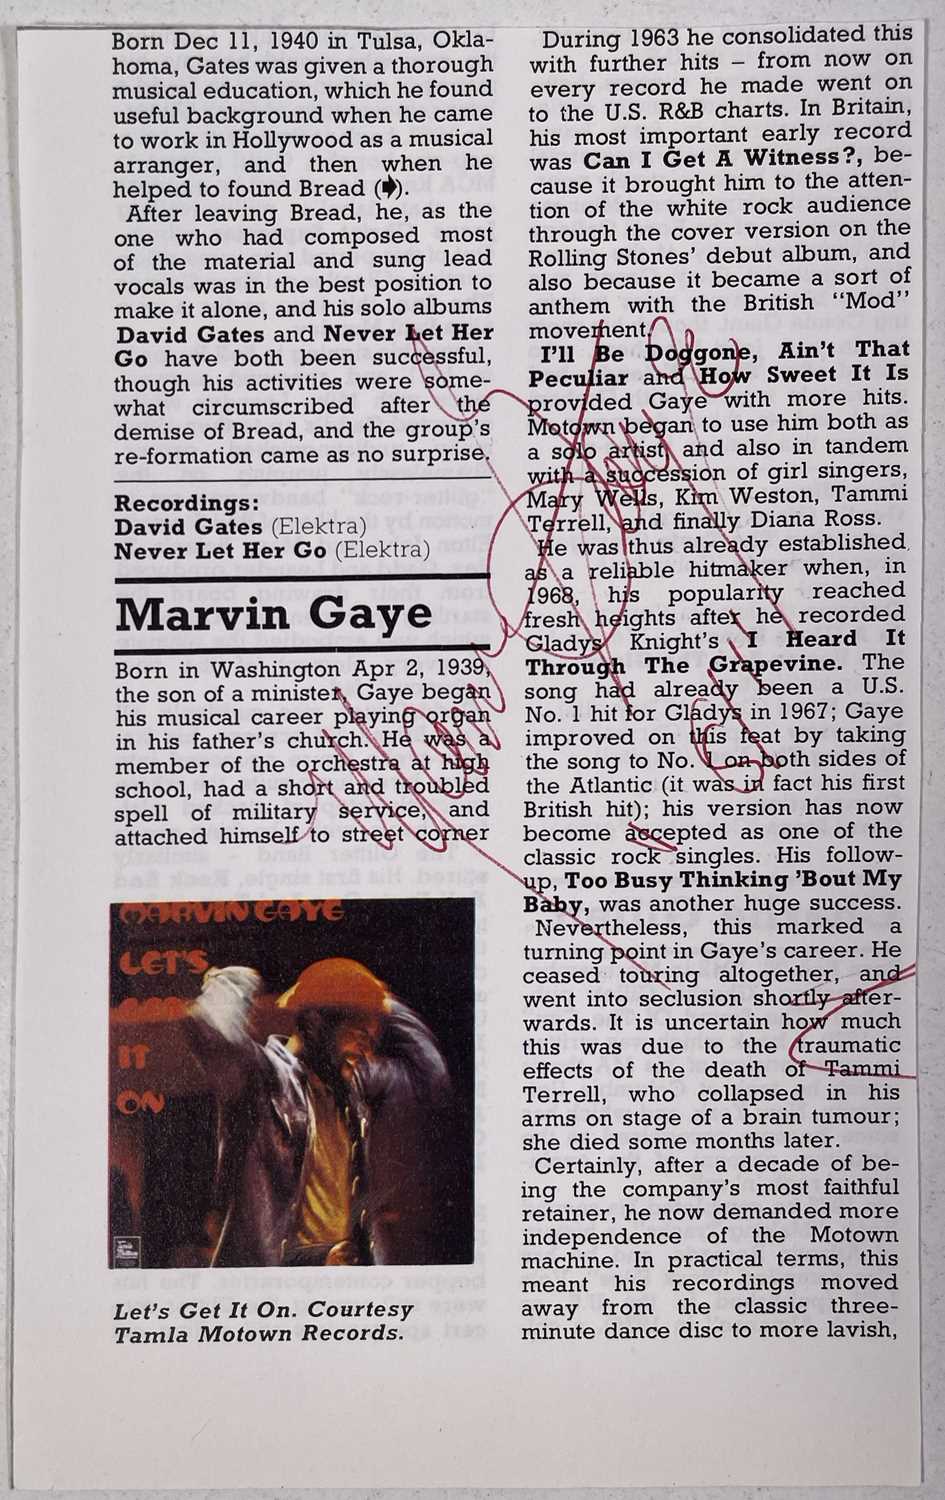 MARVIN GAYE - SIGNED CUTTING.